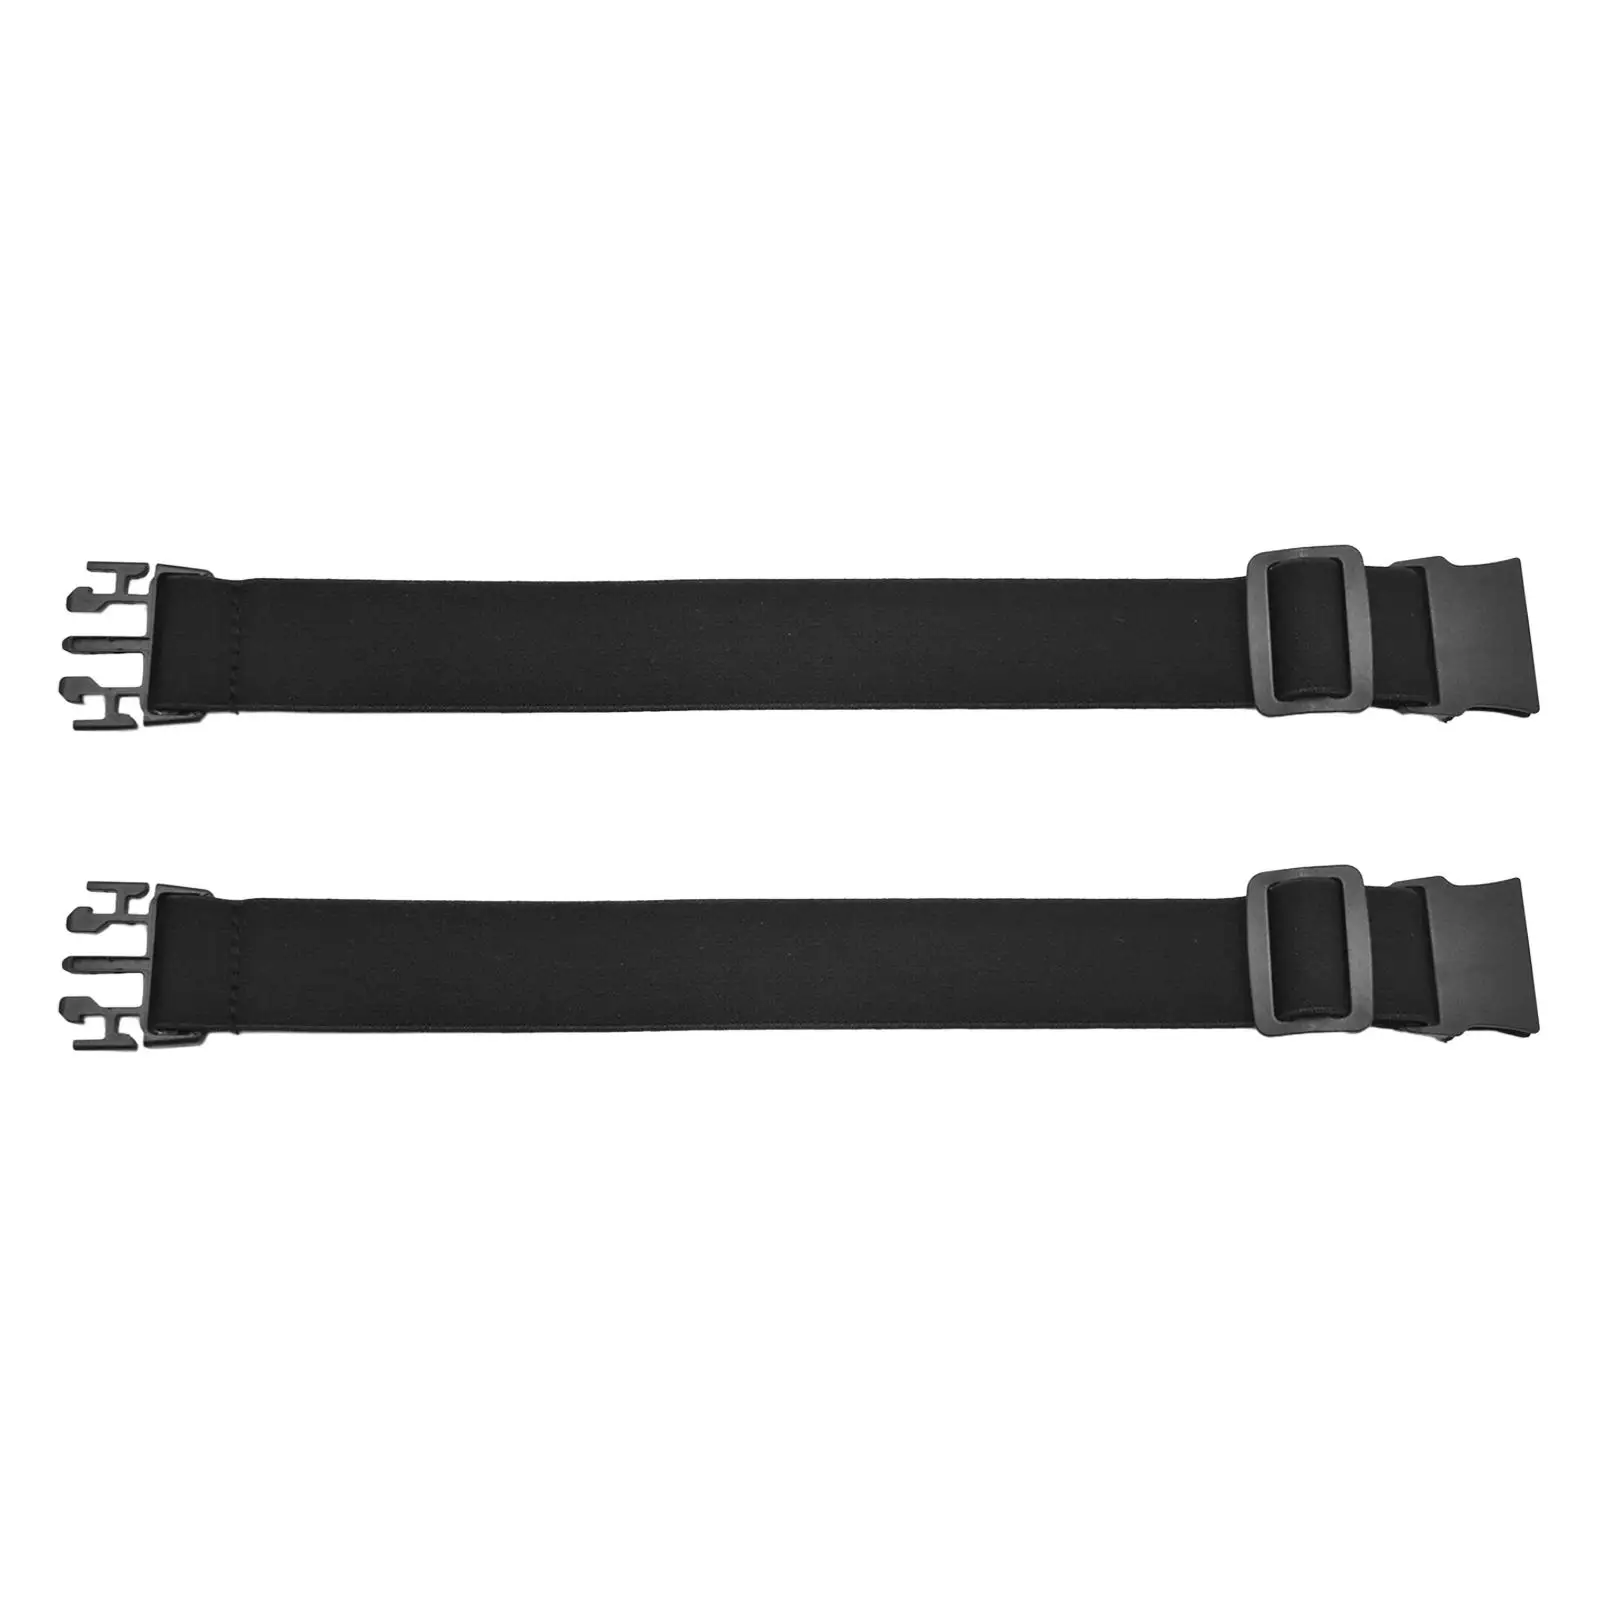 2Pcs No Buckle Elastic Belt Waist Belt Adjustable Invisible without Buckle Easy to Use for Men Women Adult and Kids Travel